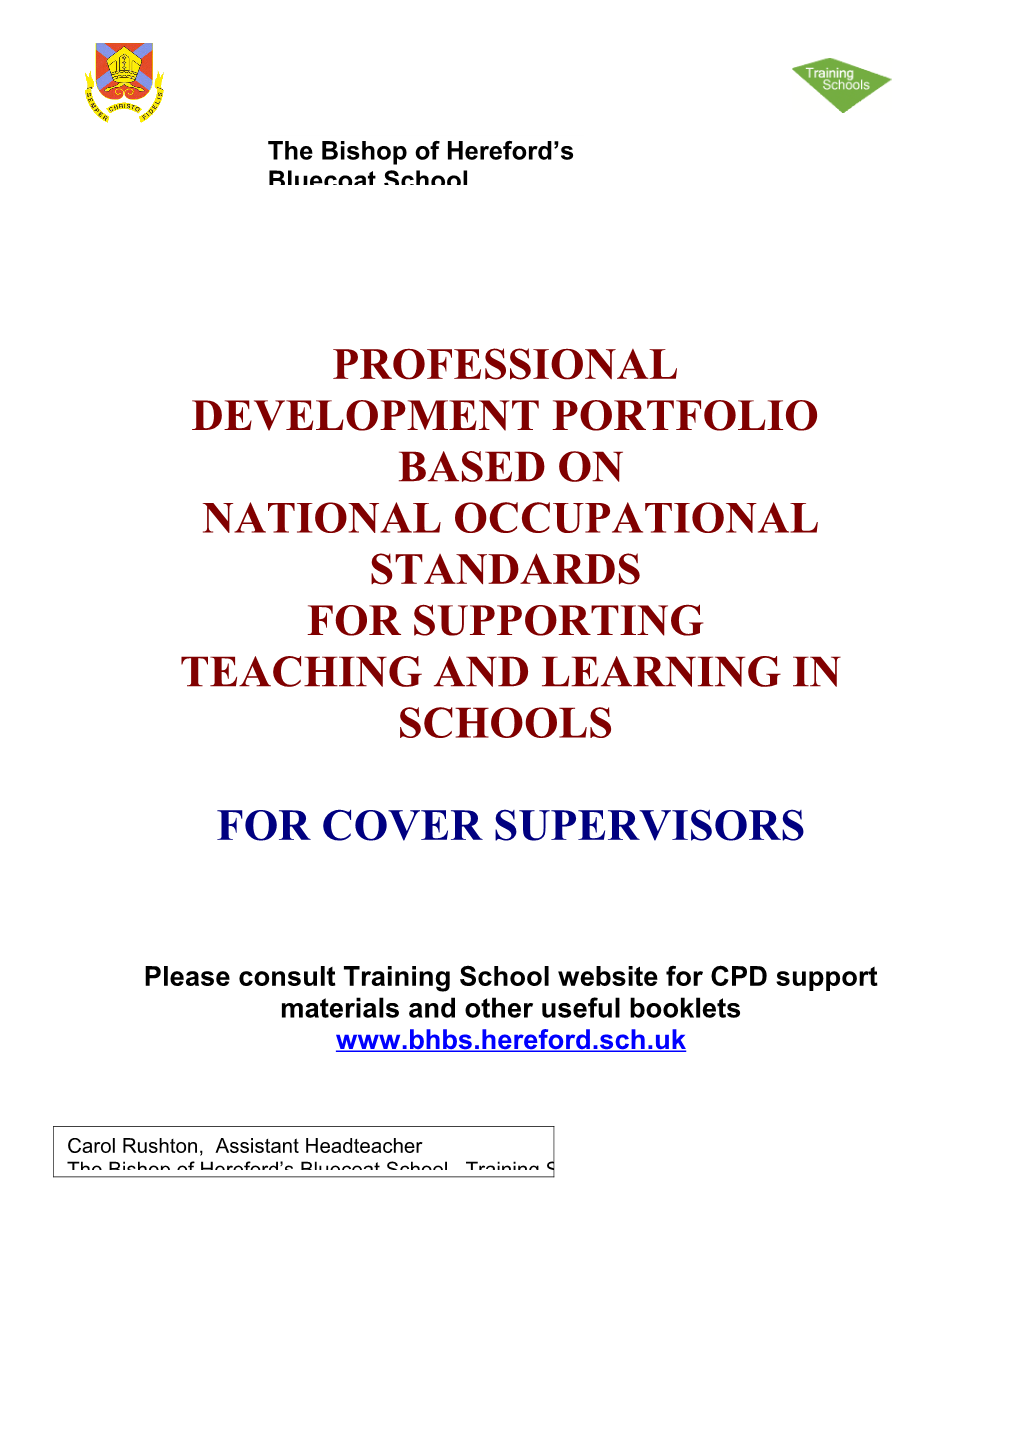 Cover Supervisors PDP